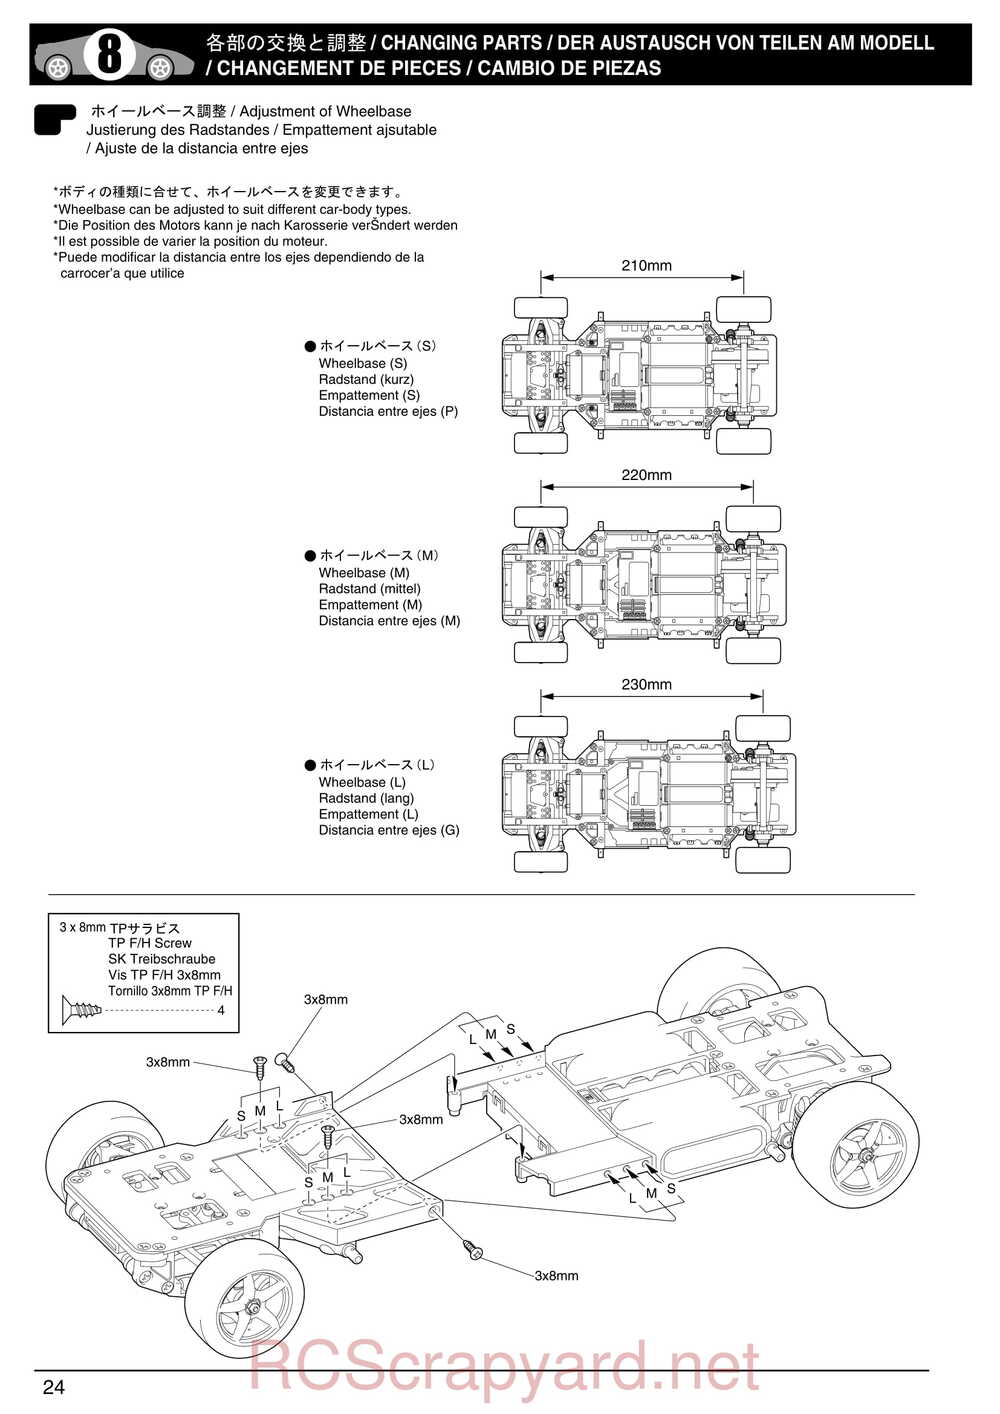 Kyosho - 30551 - a12 Sport - Manual - Page 24